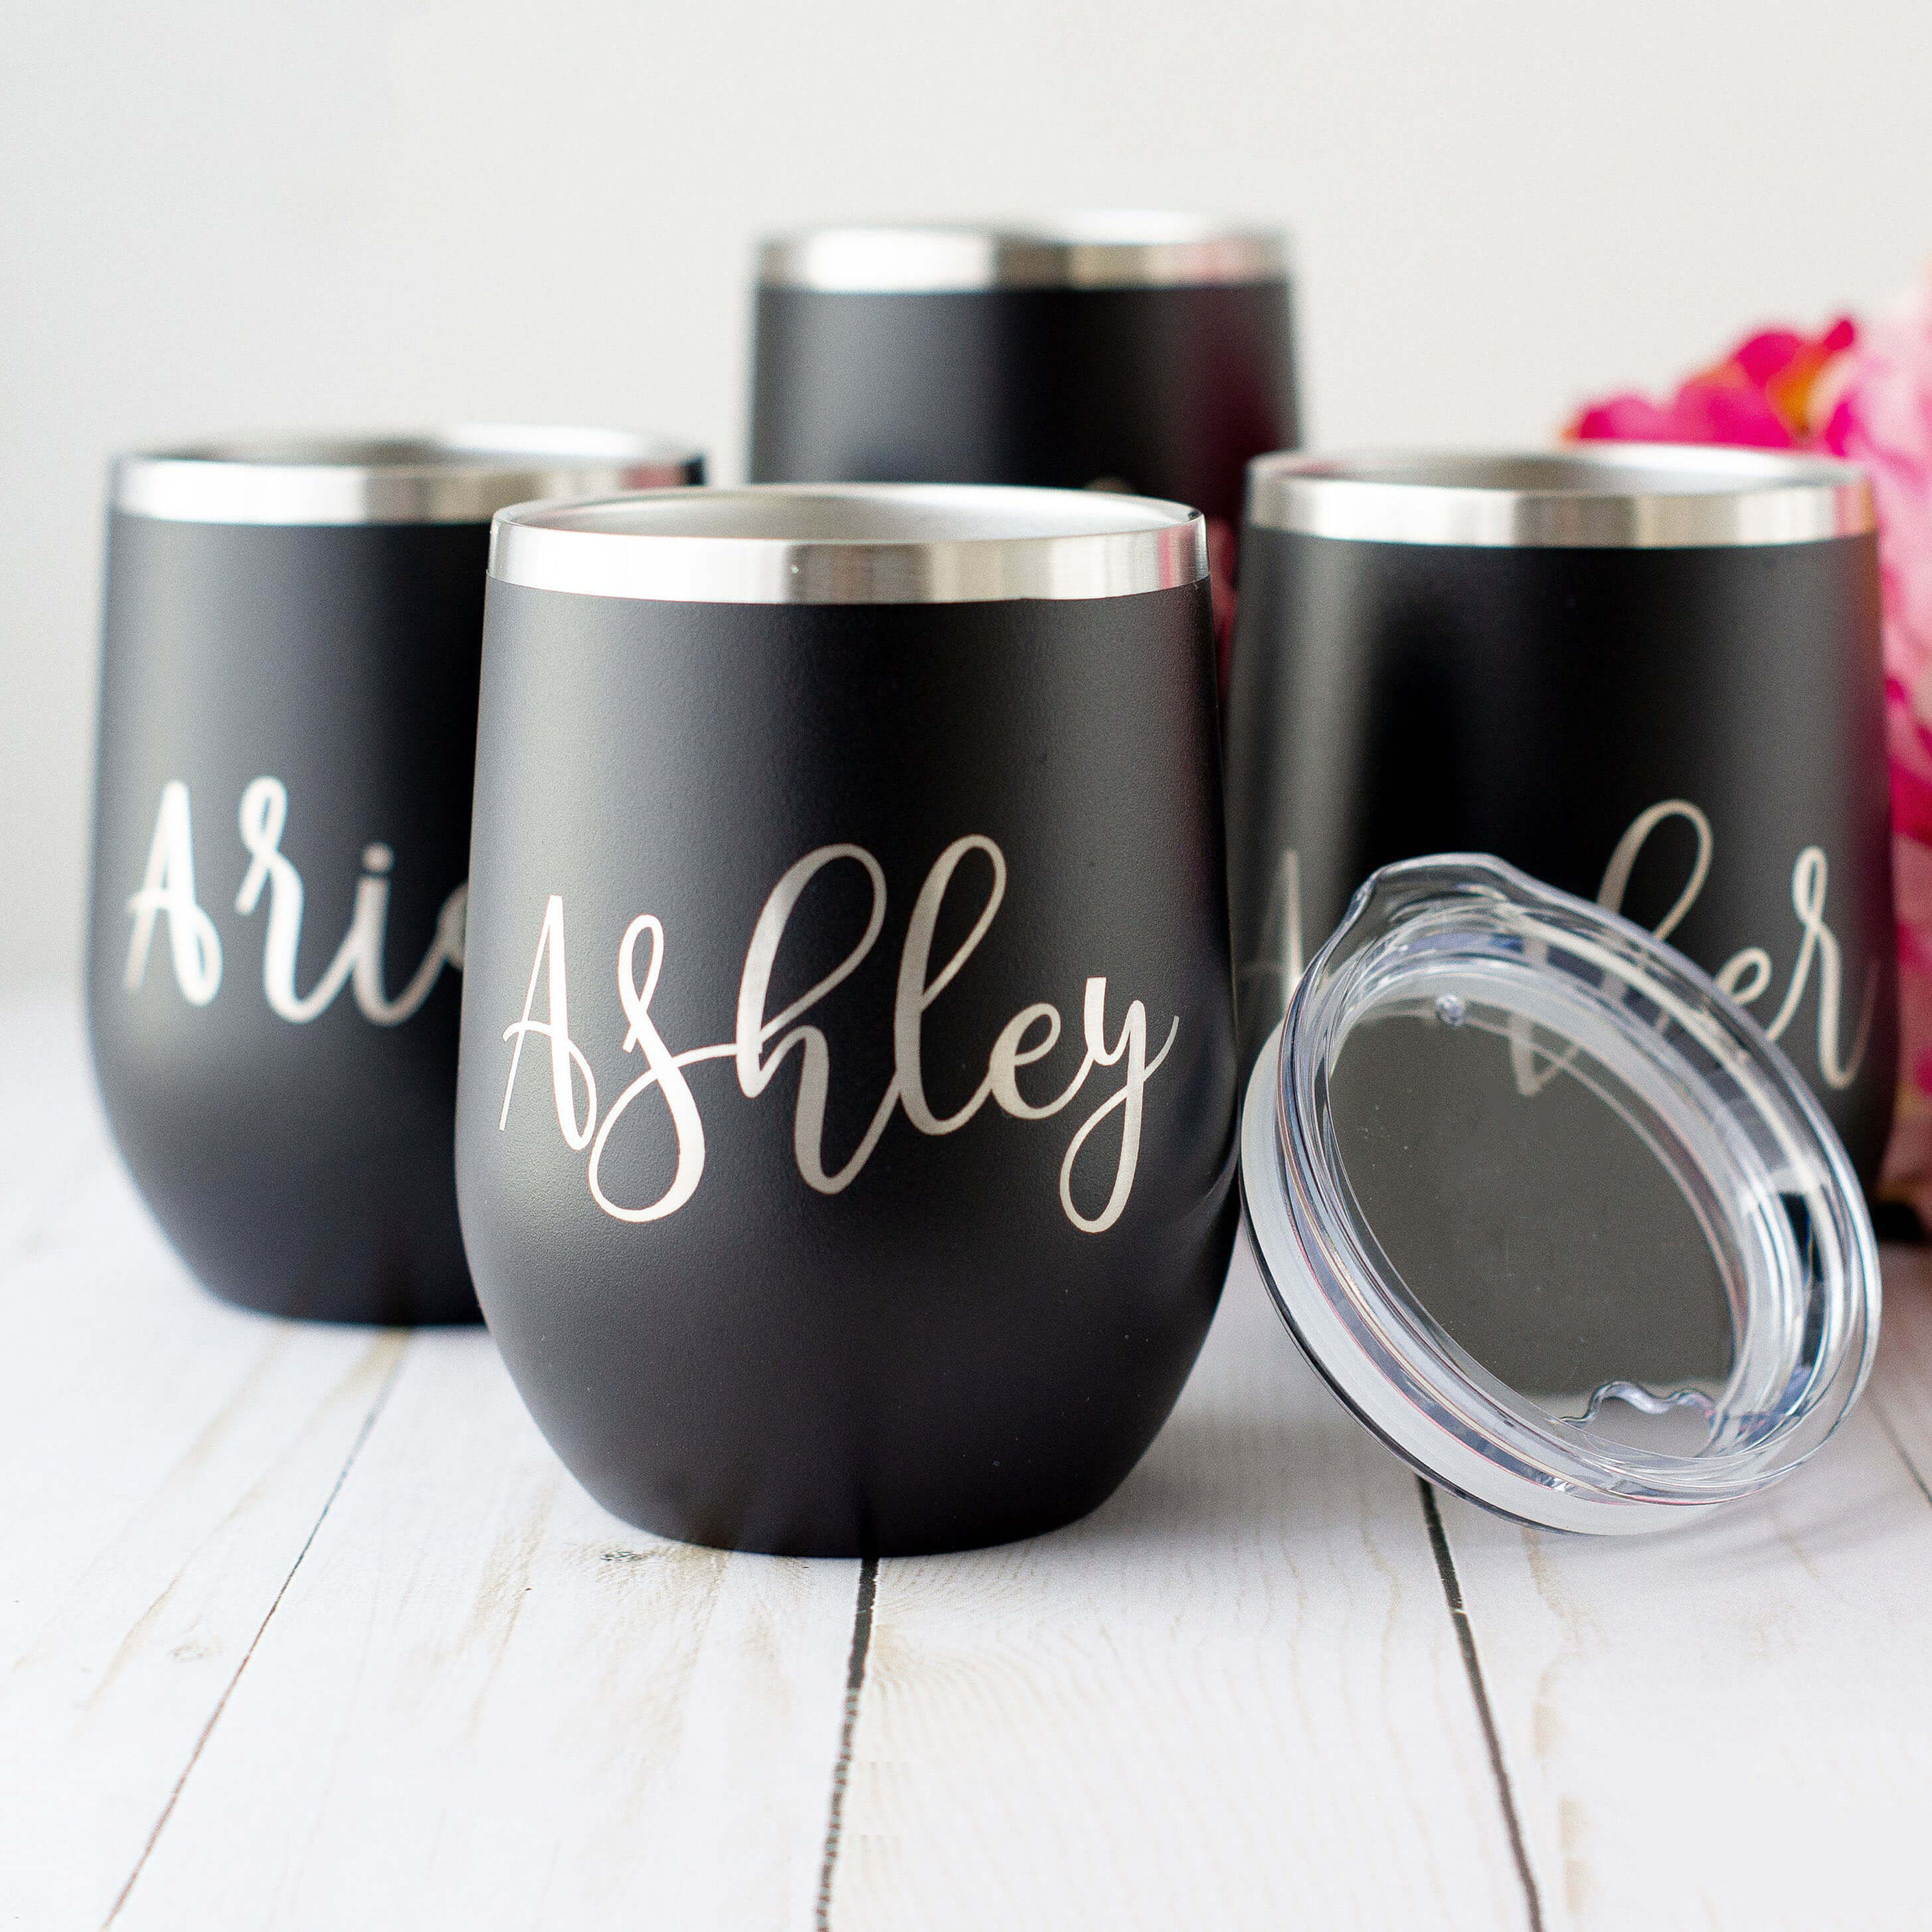 Bridesmaid Personalized Drink Tumbler - Engraved, Insulated